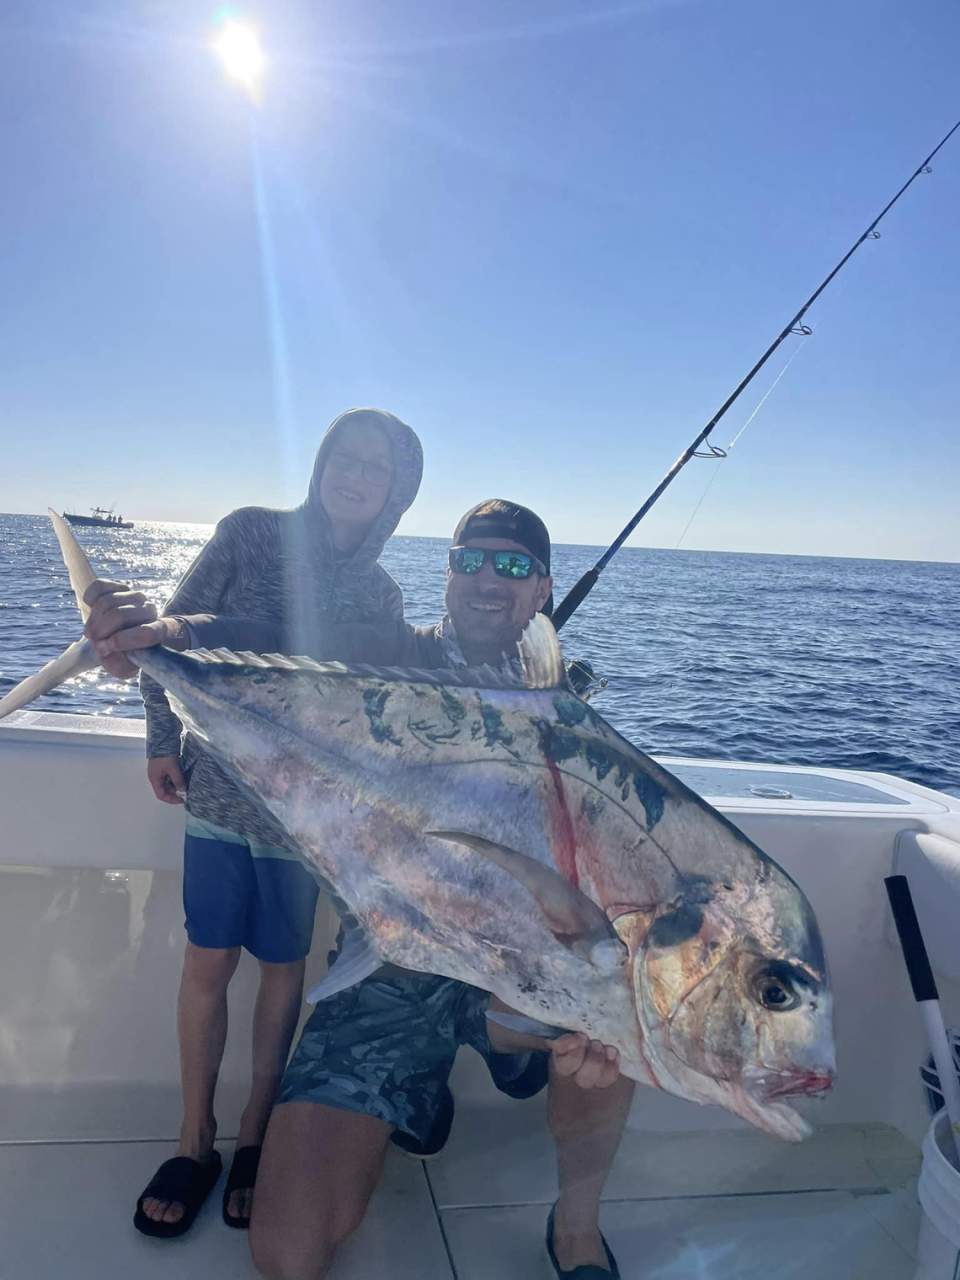 Anglers Jeremy Brongo and his son pose with a big African Pompano caught recently in the Gulf of Mexico 50 miles offshore of Anna Maria Island.